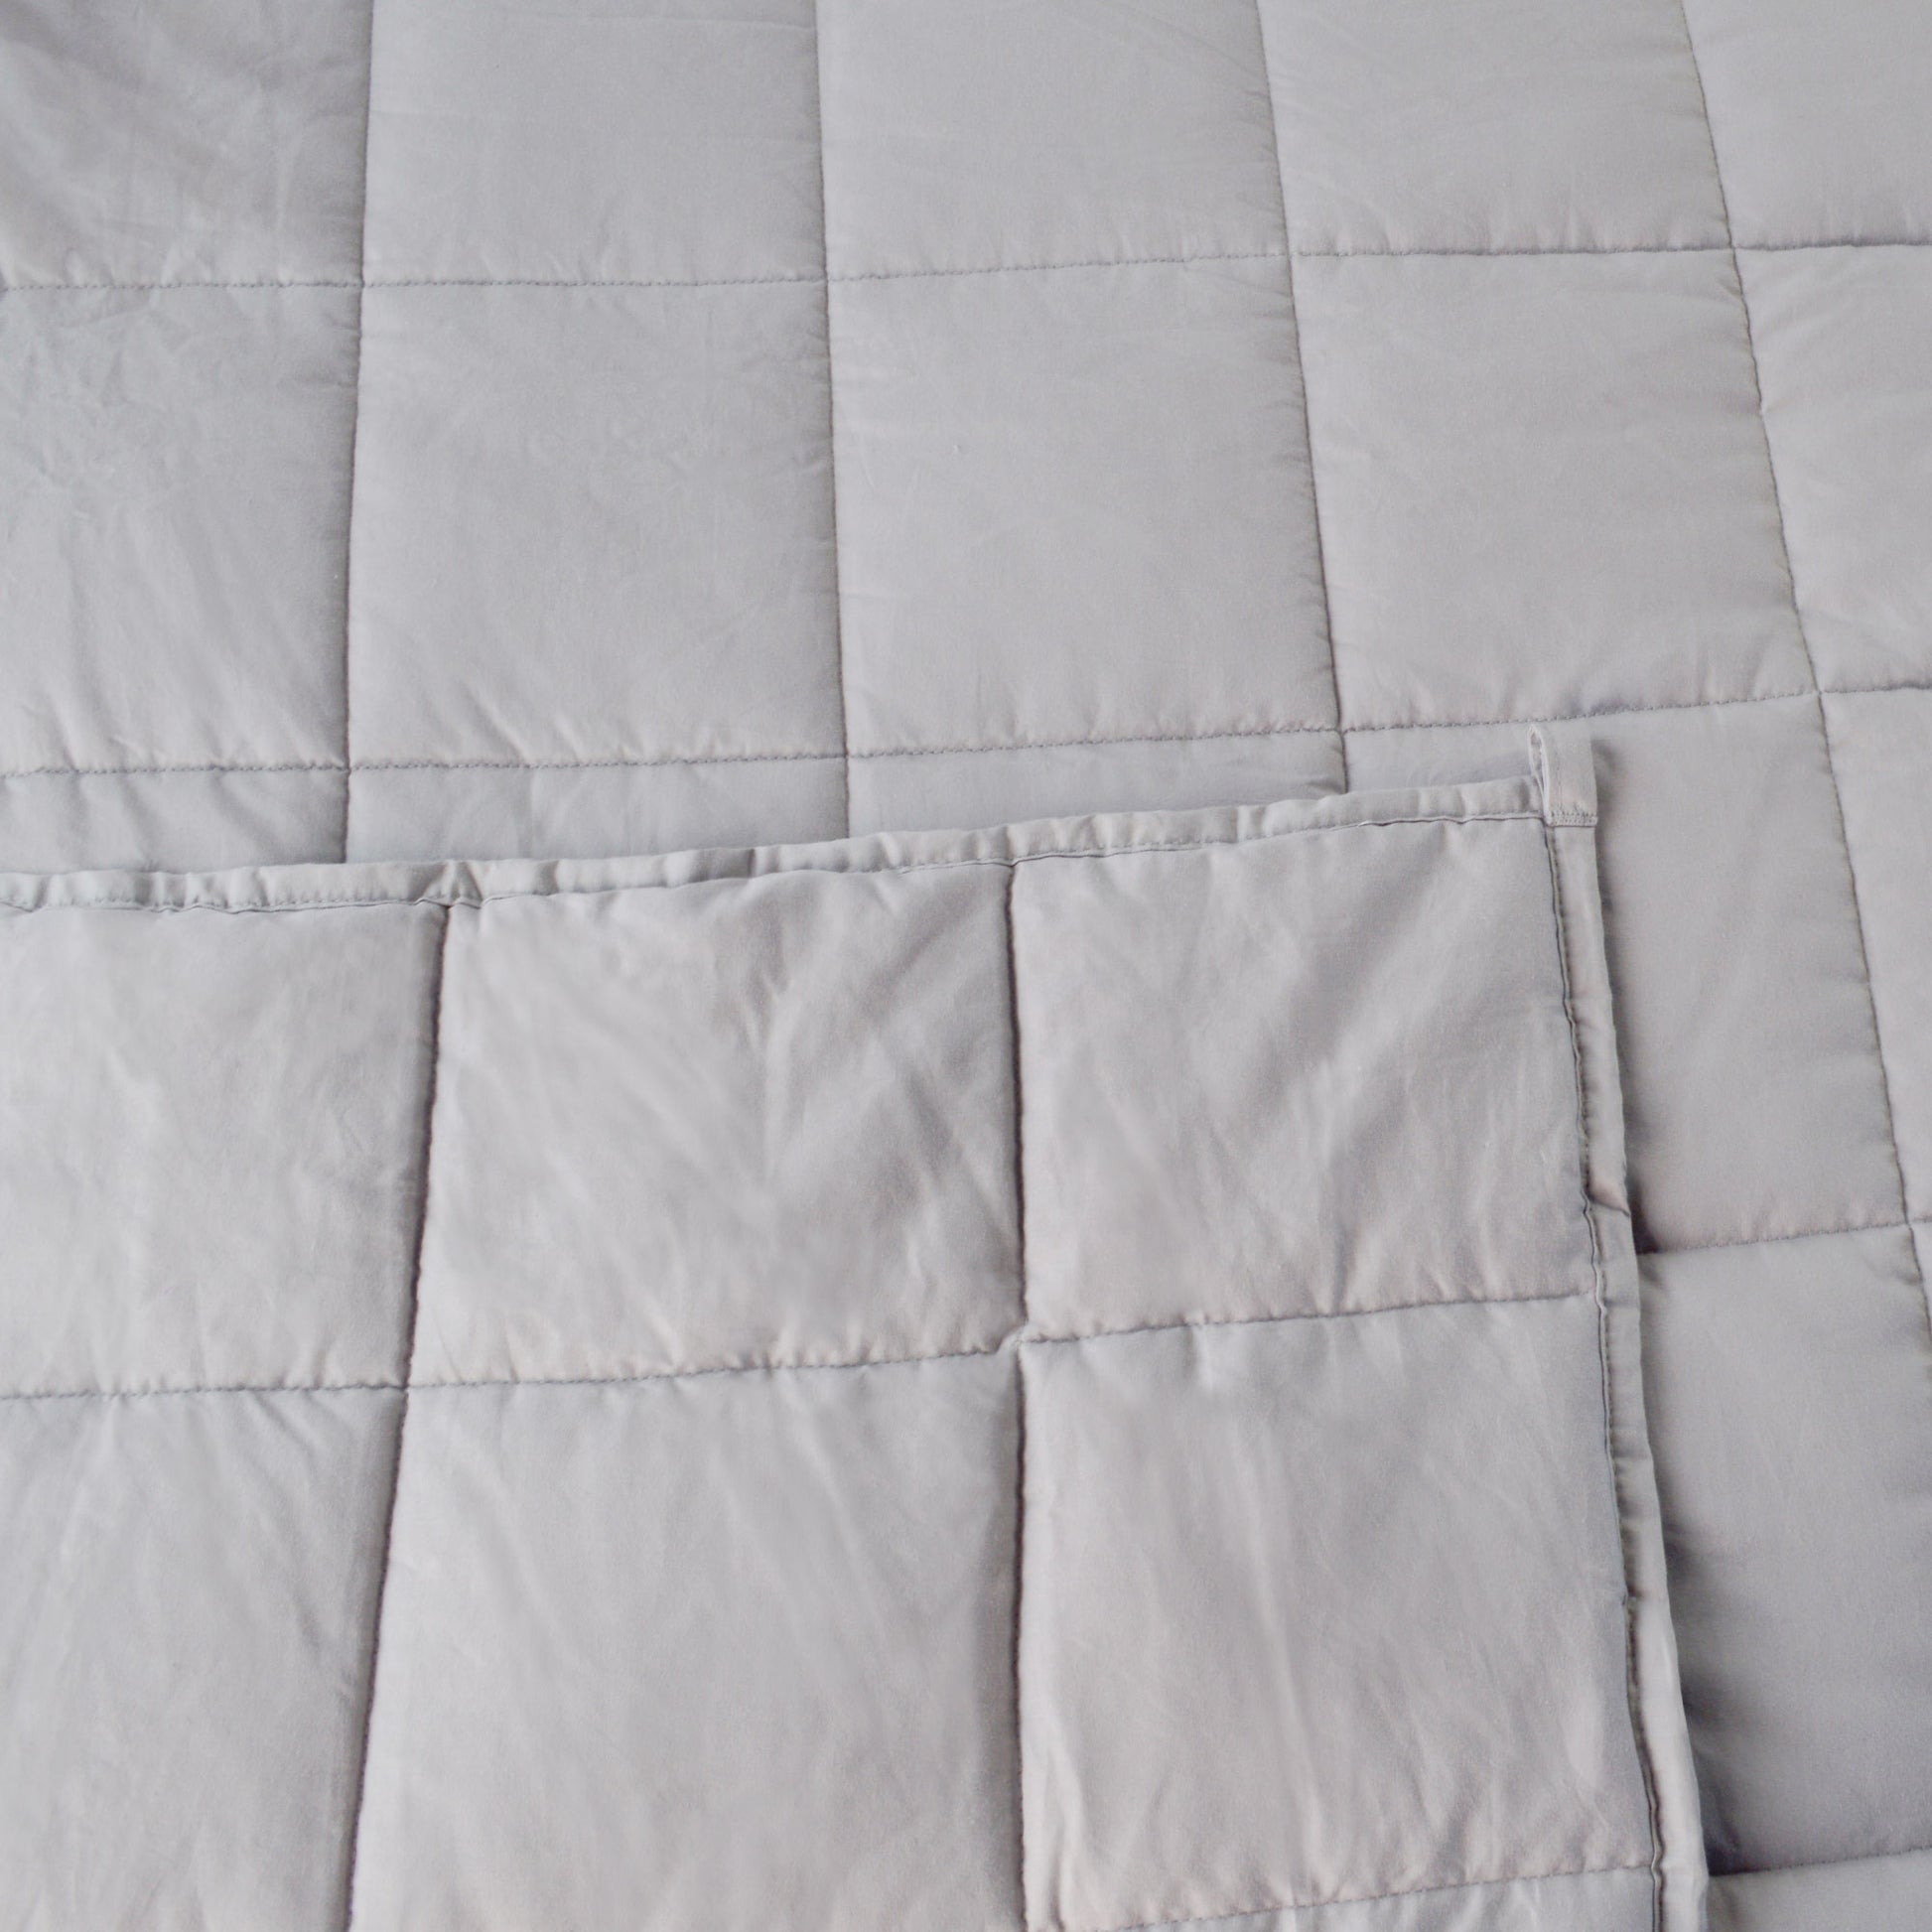 weighted blanket for restful sleep anxiety relief